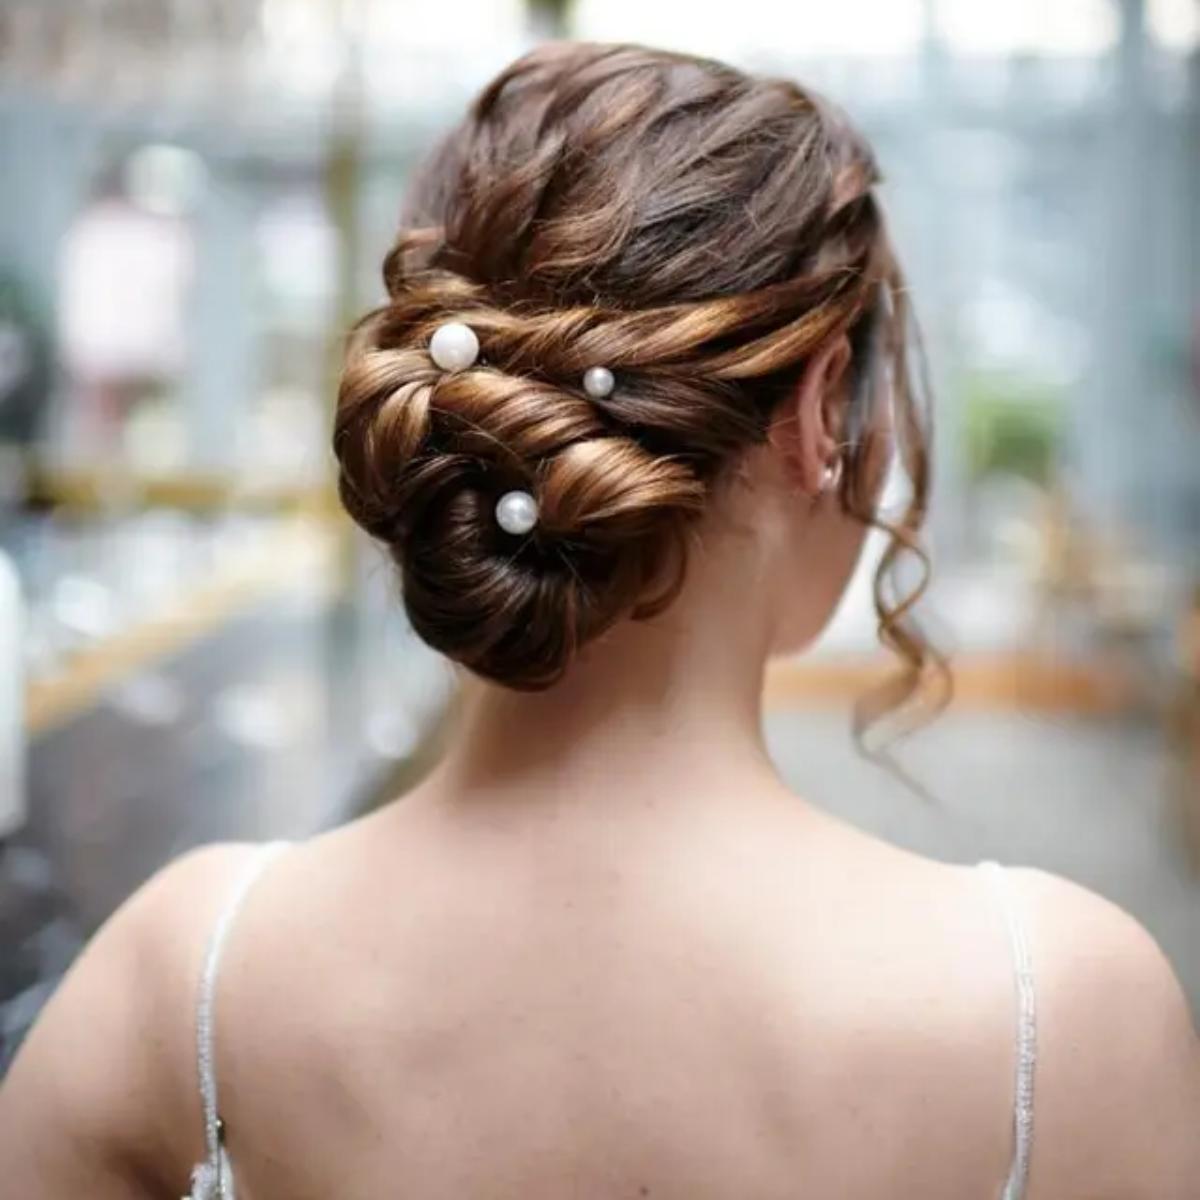 The Thirty-Day Challenge That Taught a Hair-Down Girl to Love Updos - Verily